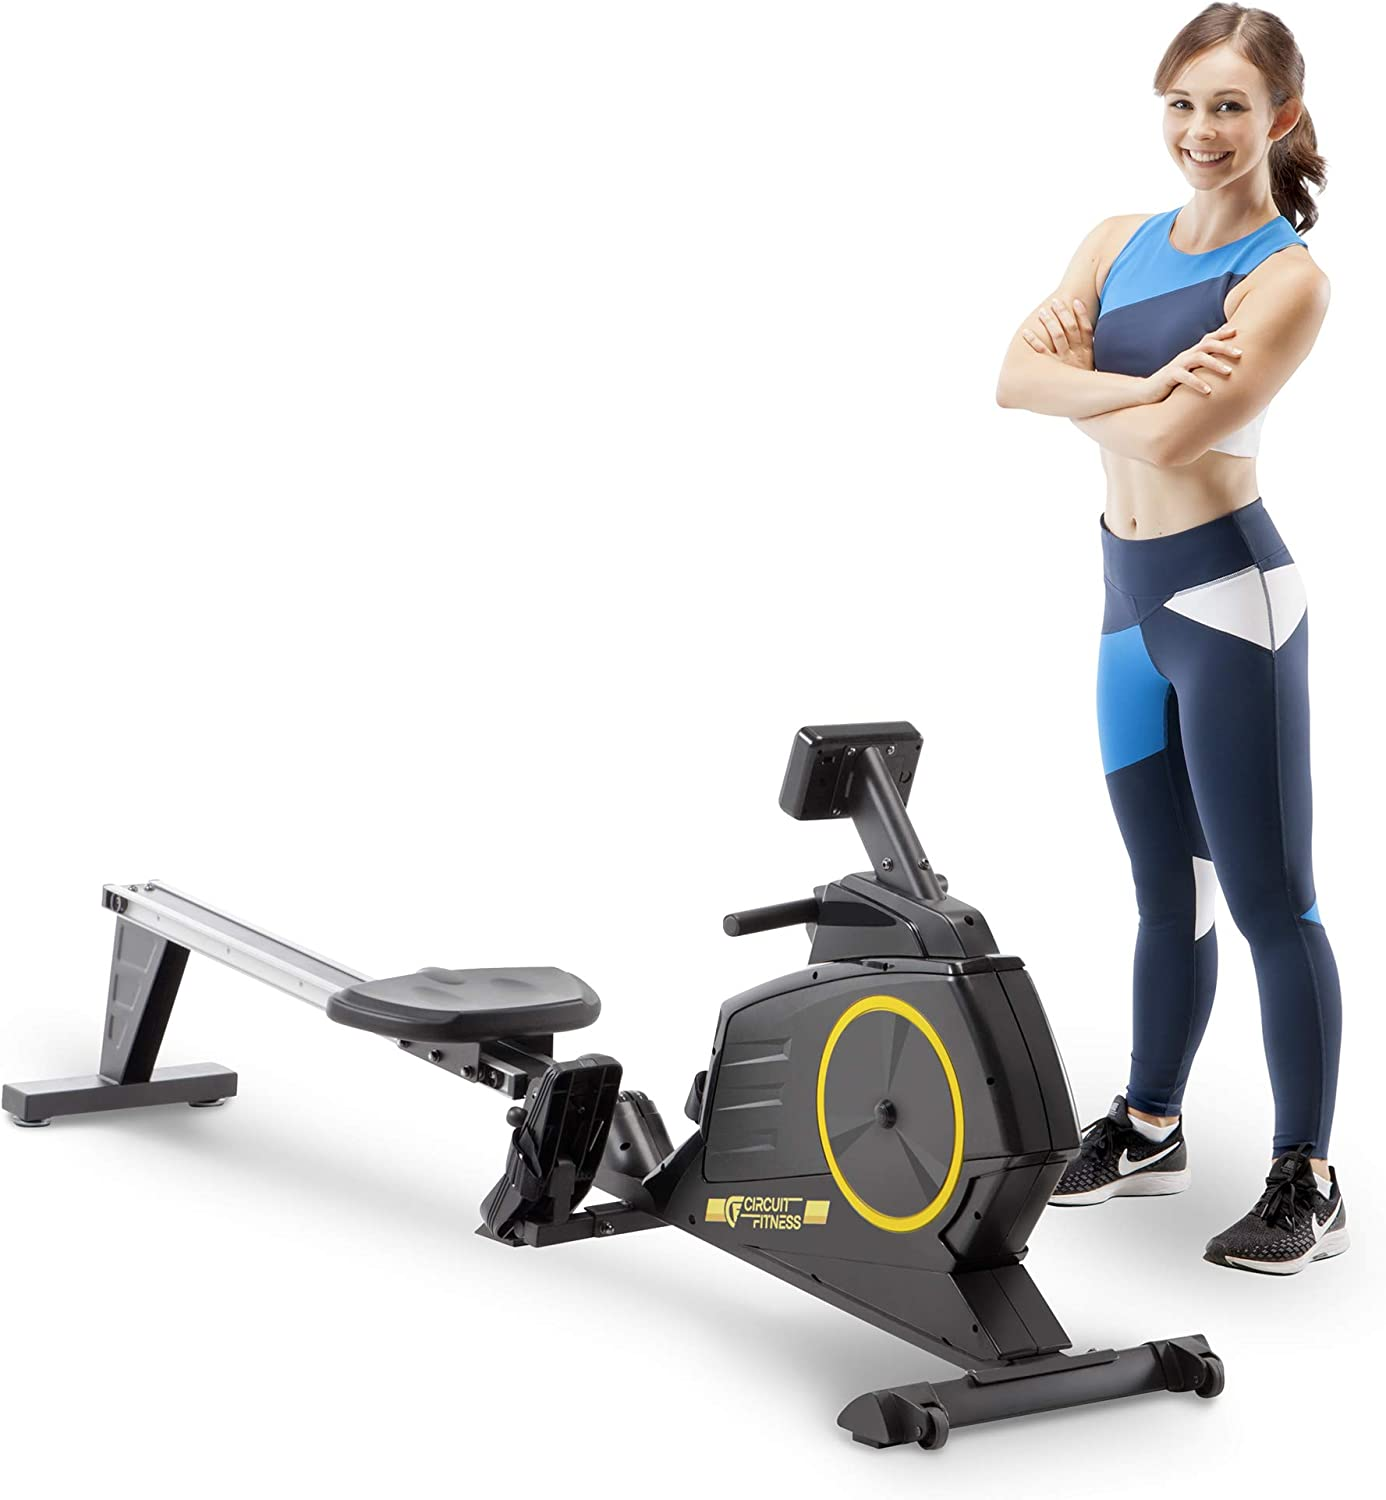 Circuit Fitness Deluxe Foldable Magnetic Rowing Machine with 8 Resistance Settings and LCD Monitor $174.17